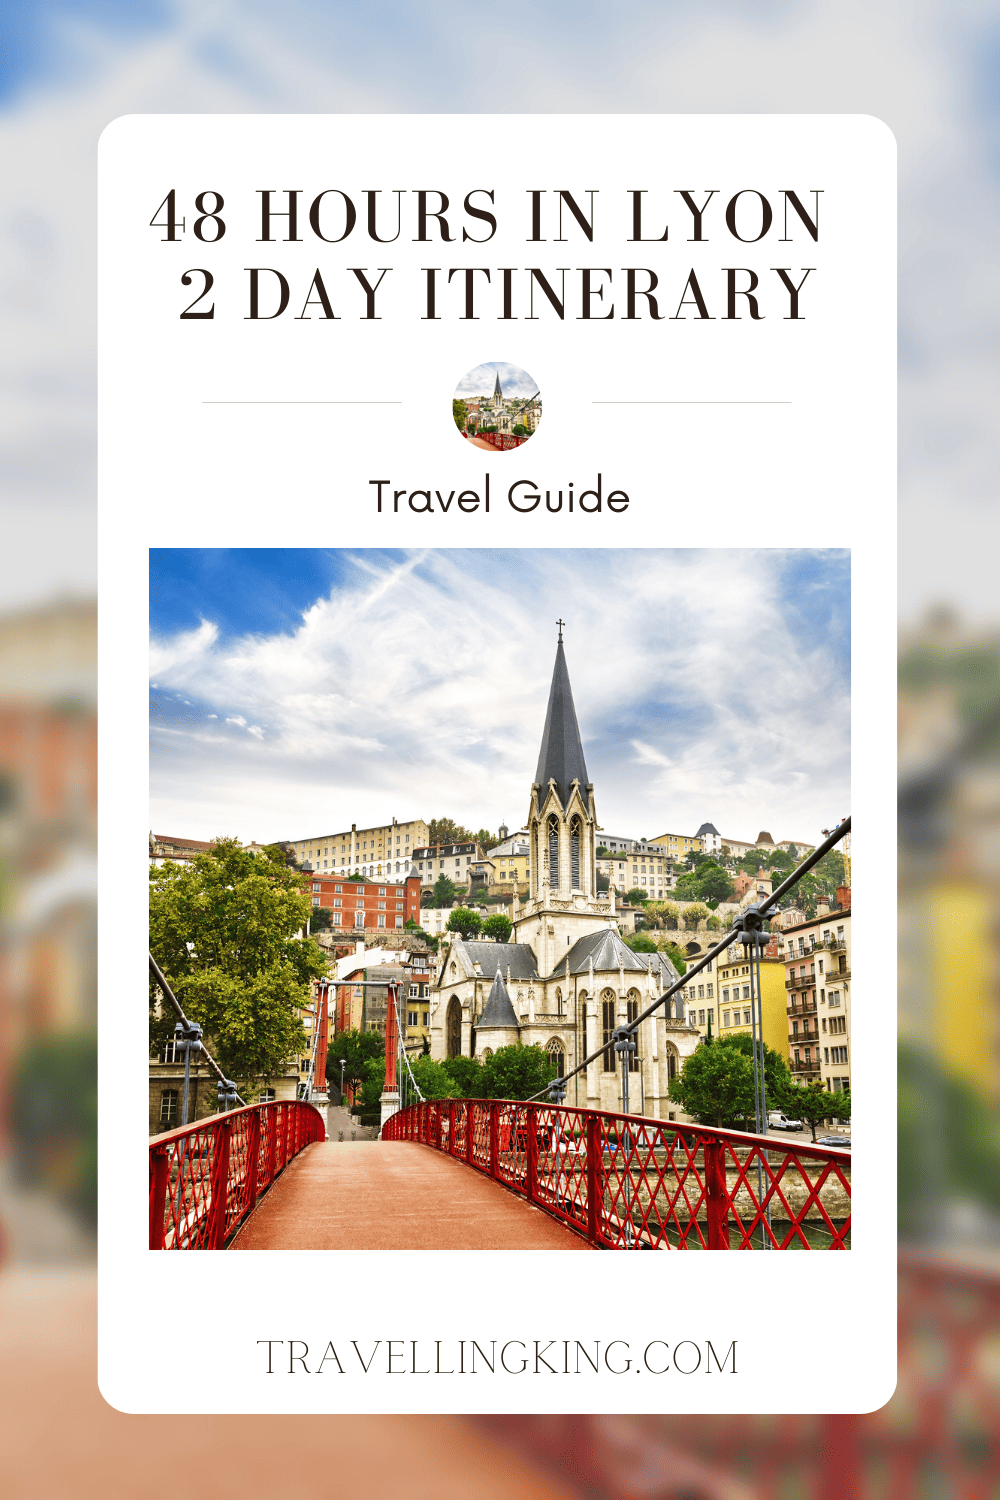 48 Hours in Lyon - 2 Day Itinerary